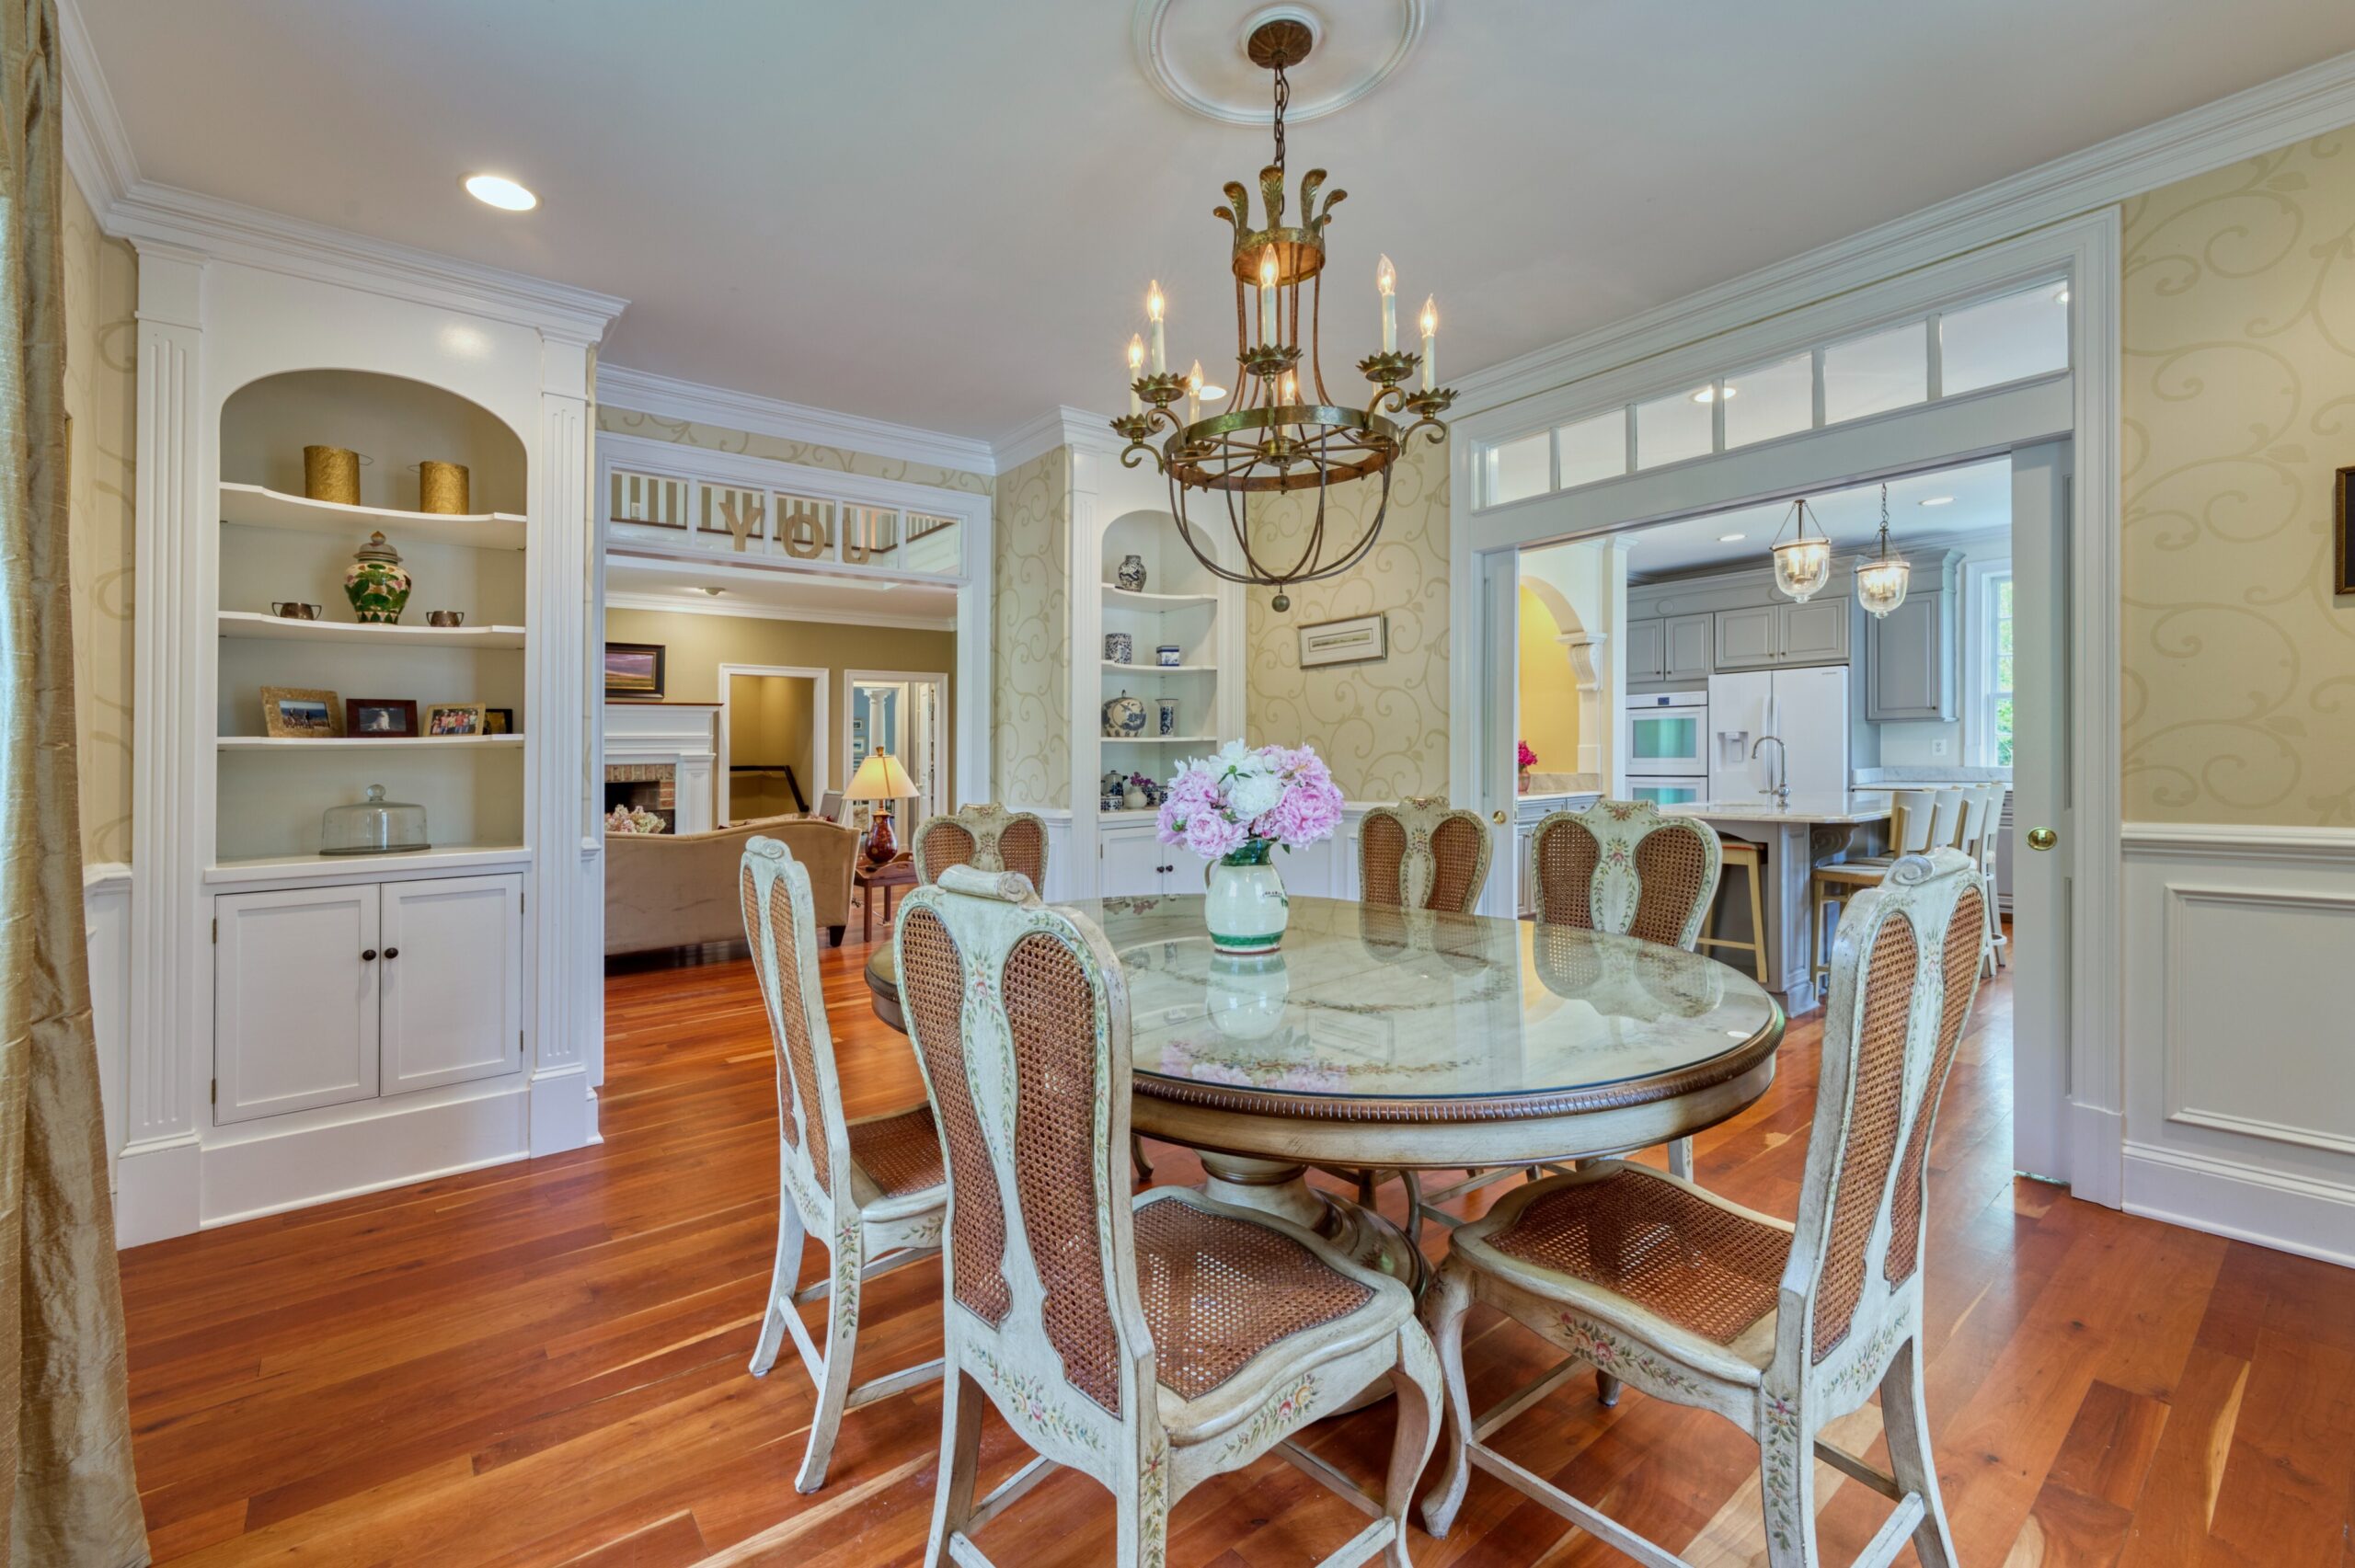 Professional interior photo of 15203 Clover Hill Road - showing the formal dining room with chandelier and cherry floors